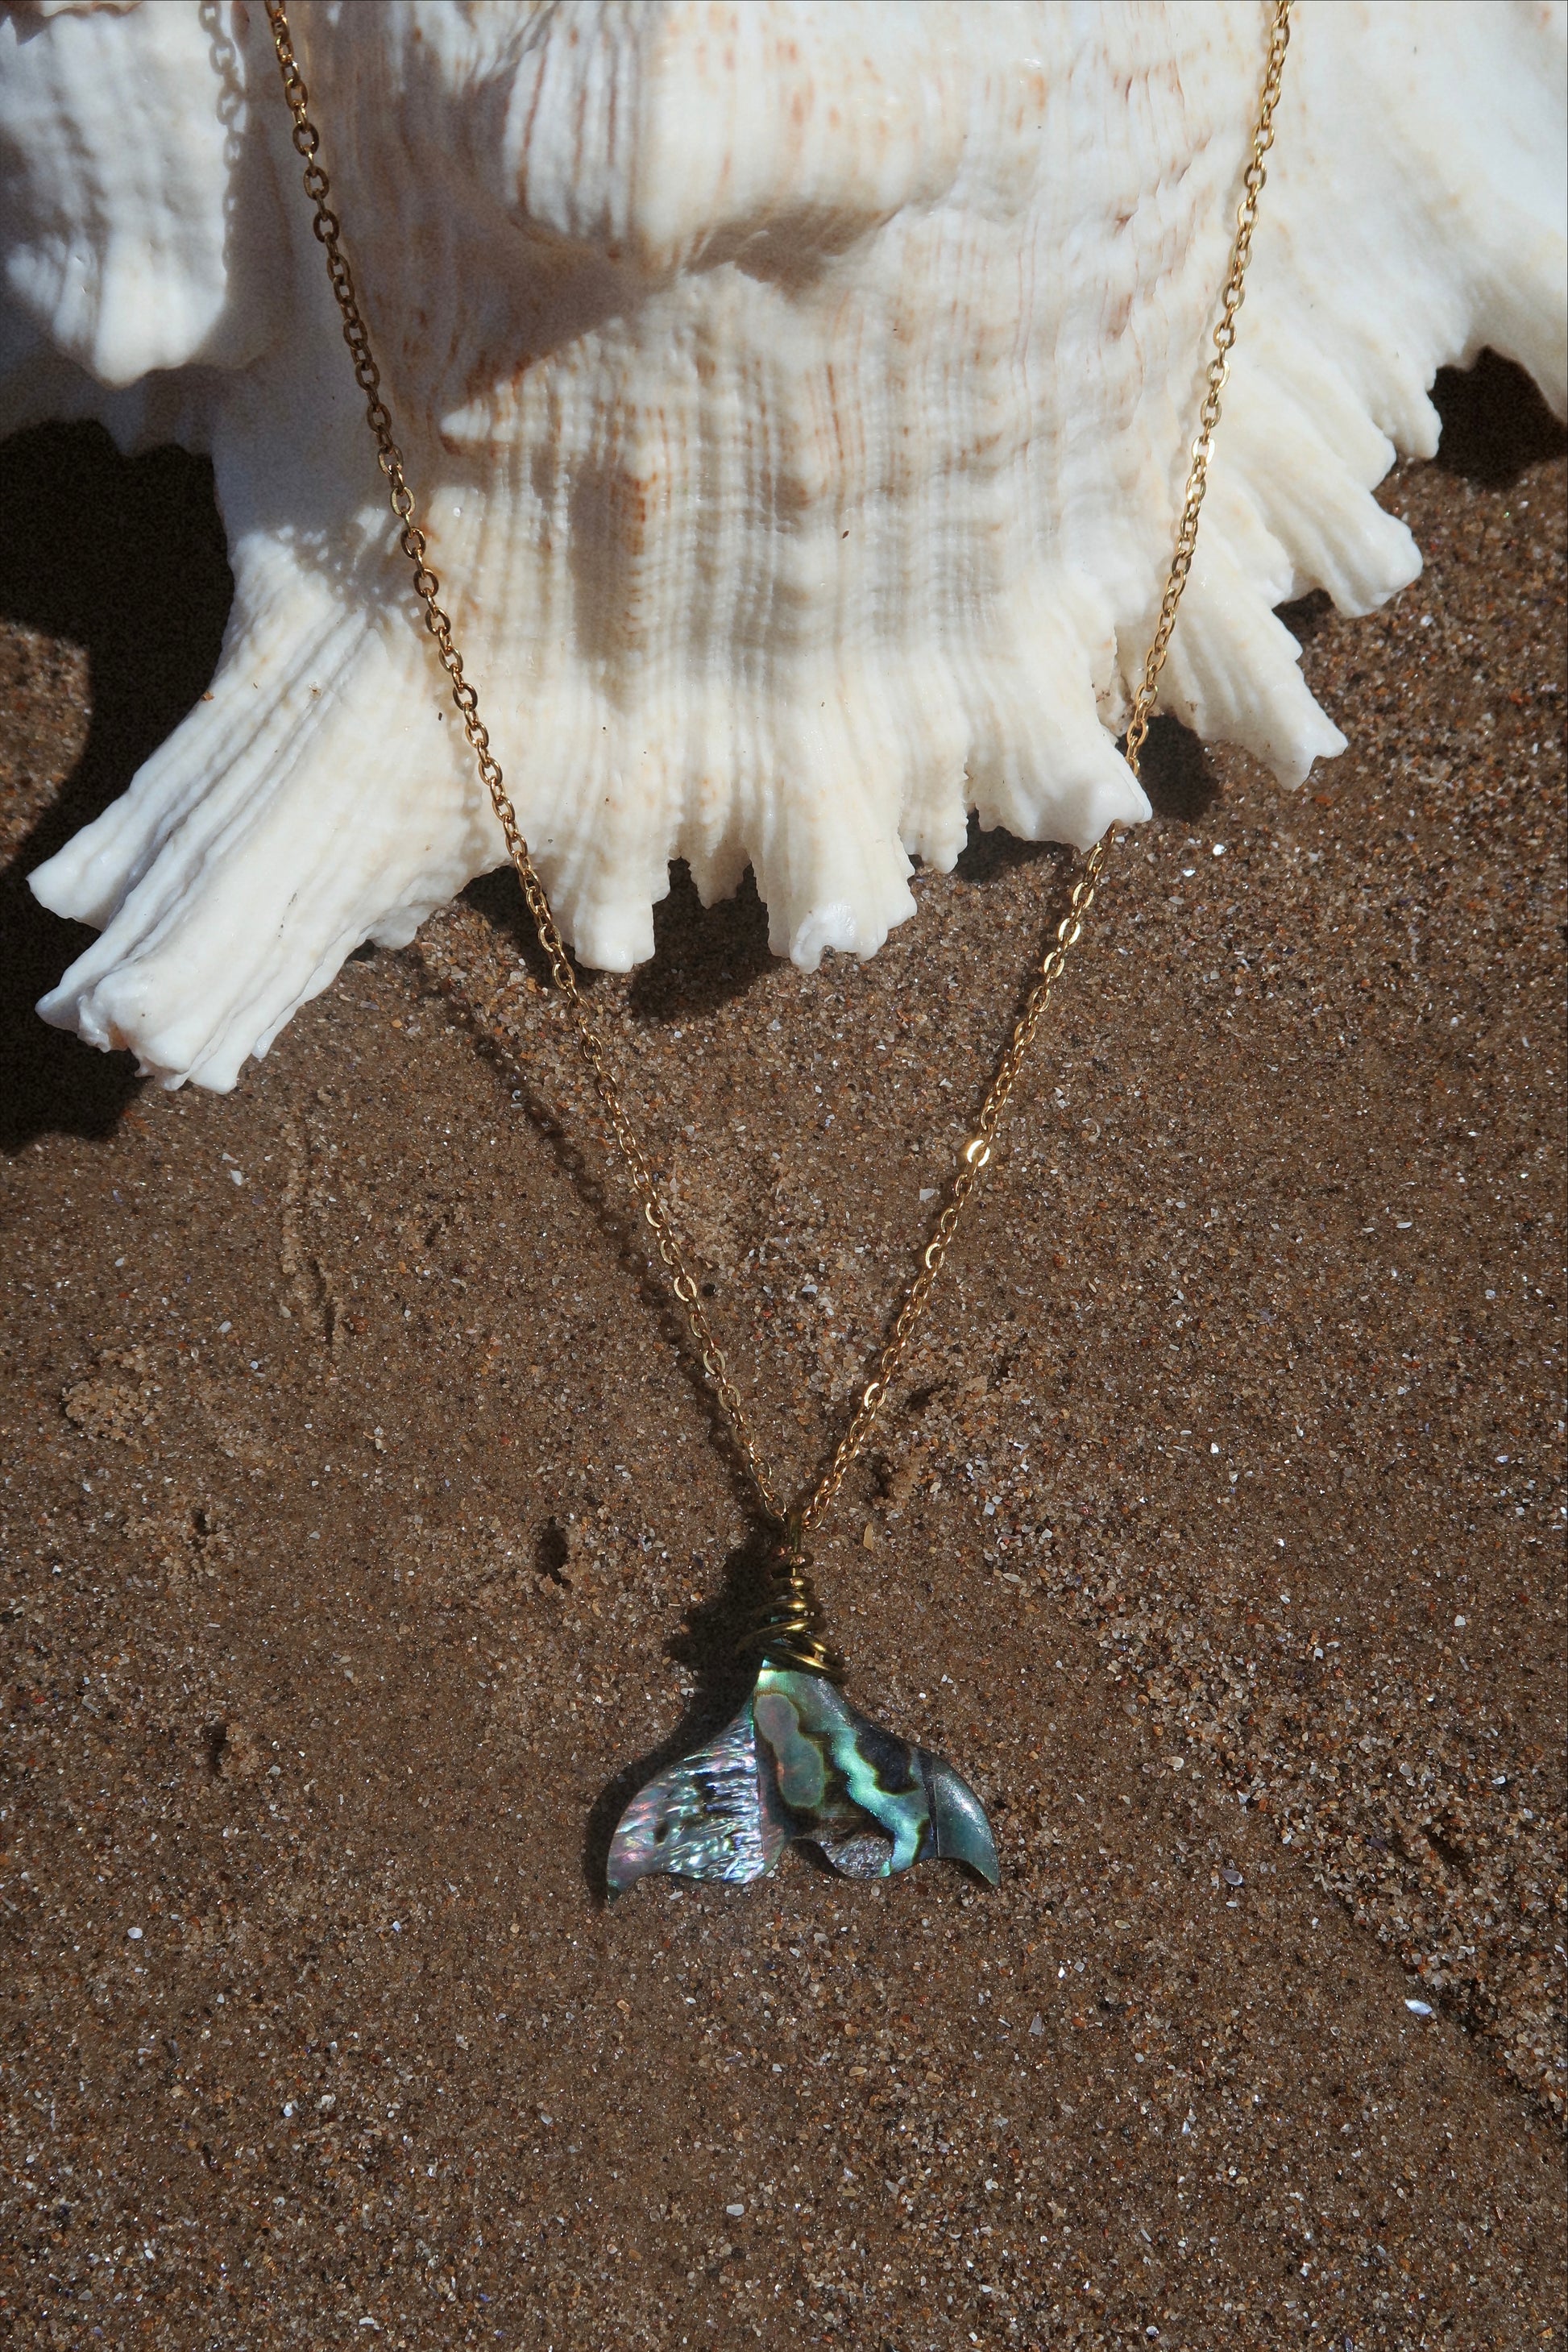 SIREN TAIL NECKLACE – Sirencore Jewelry